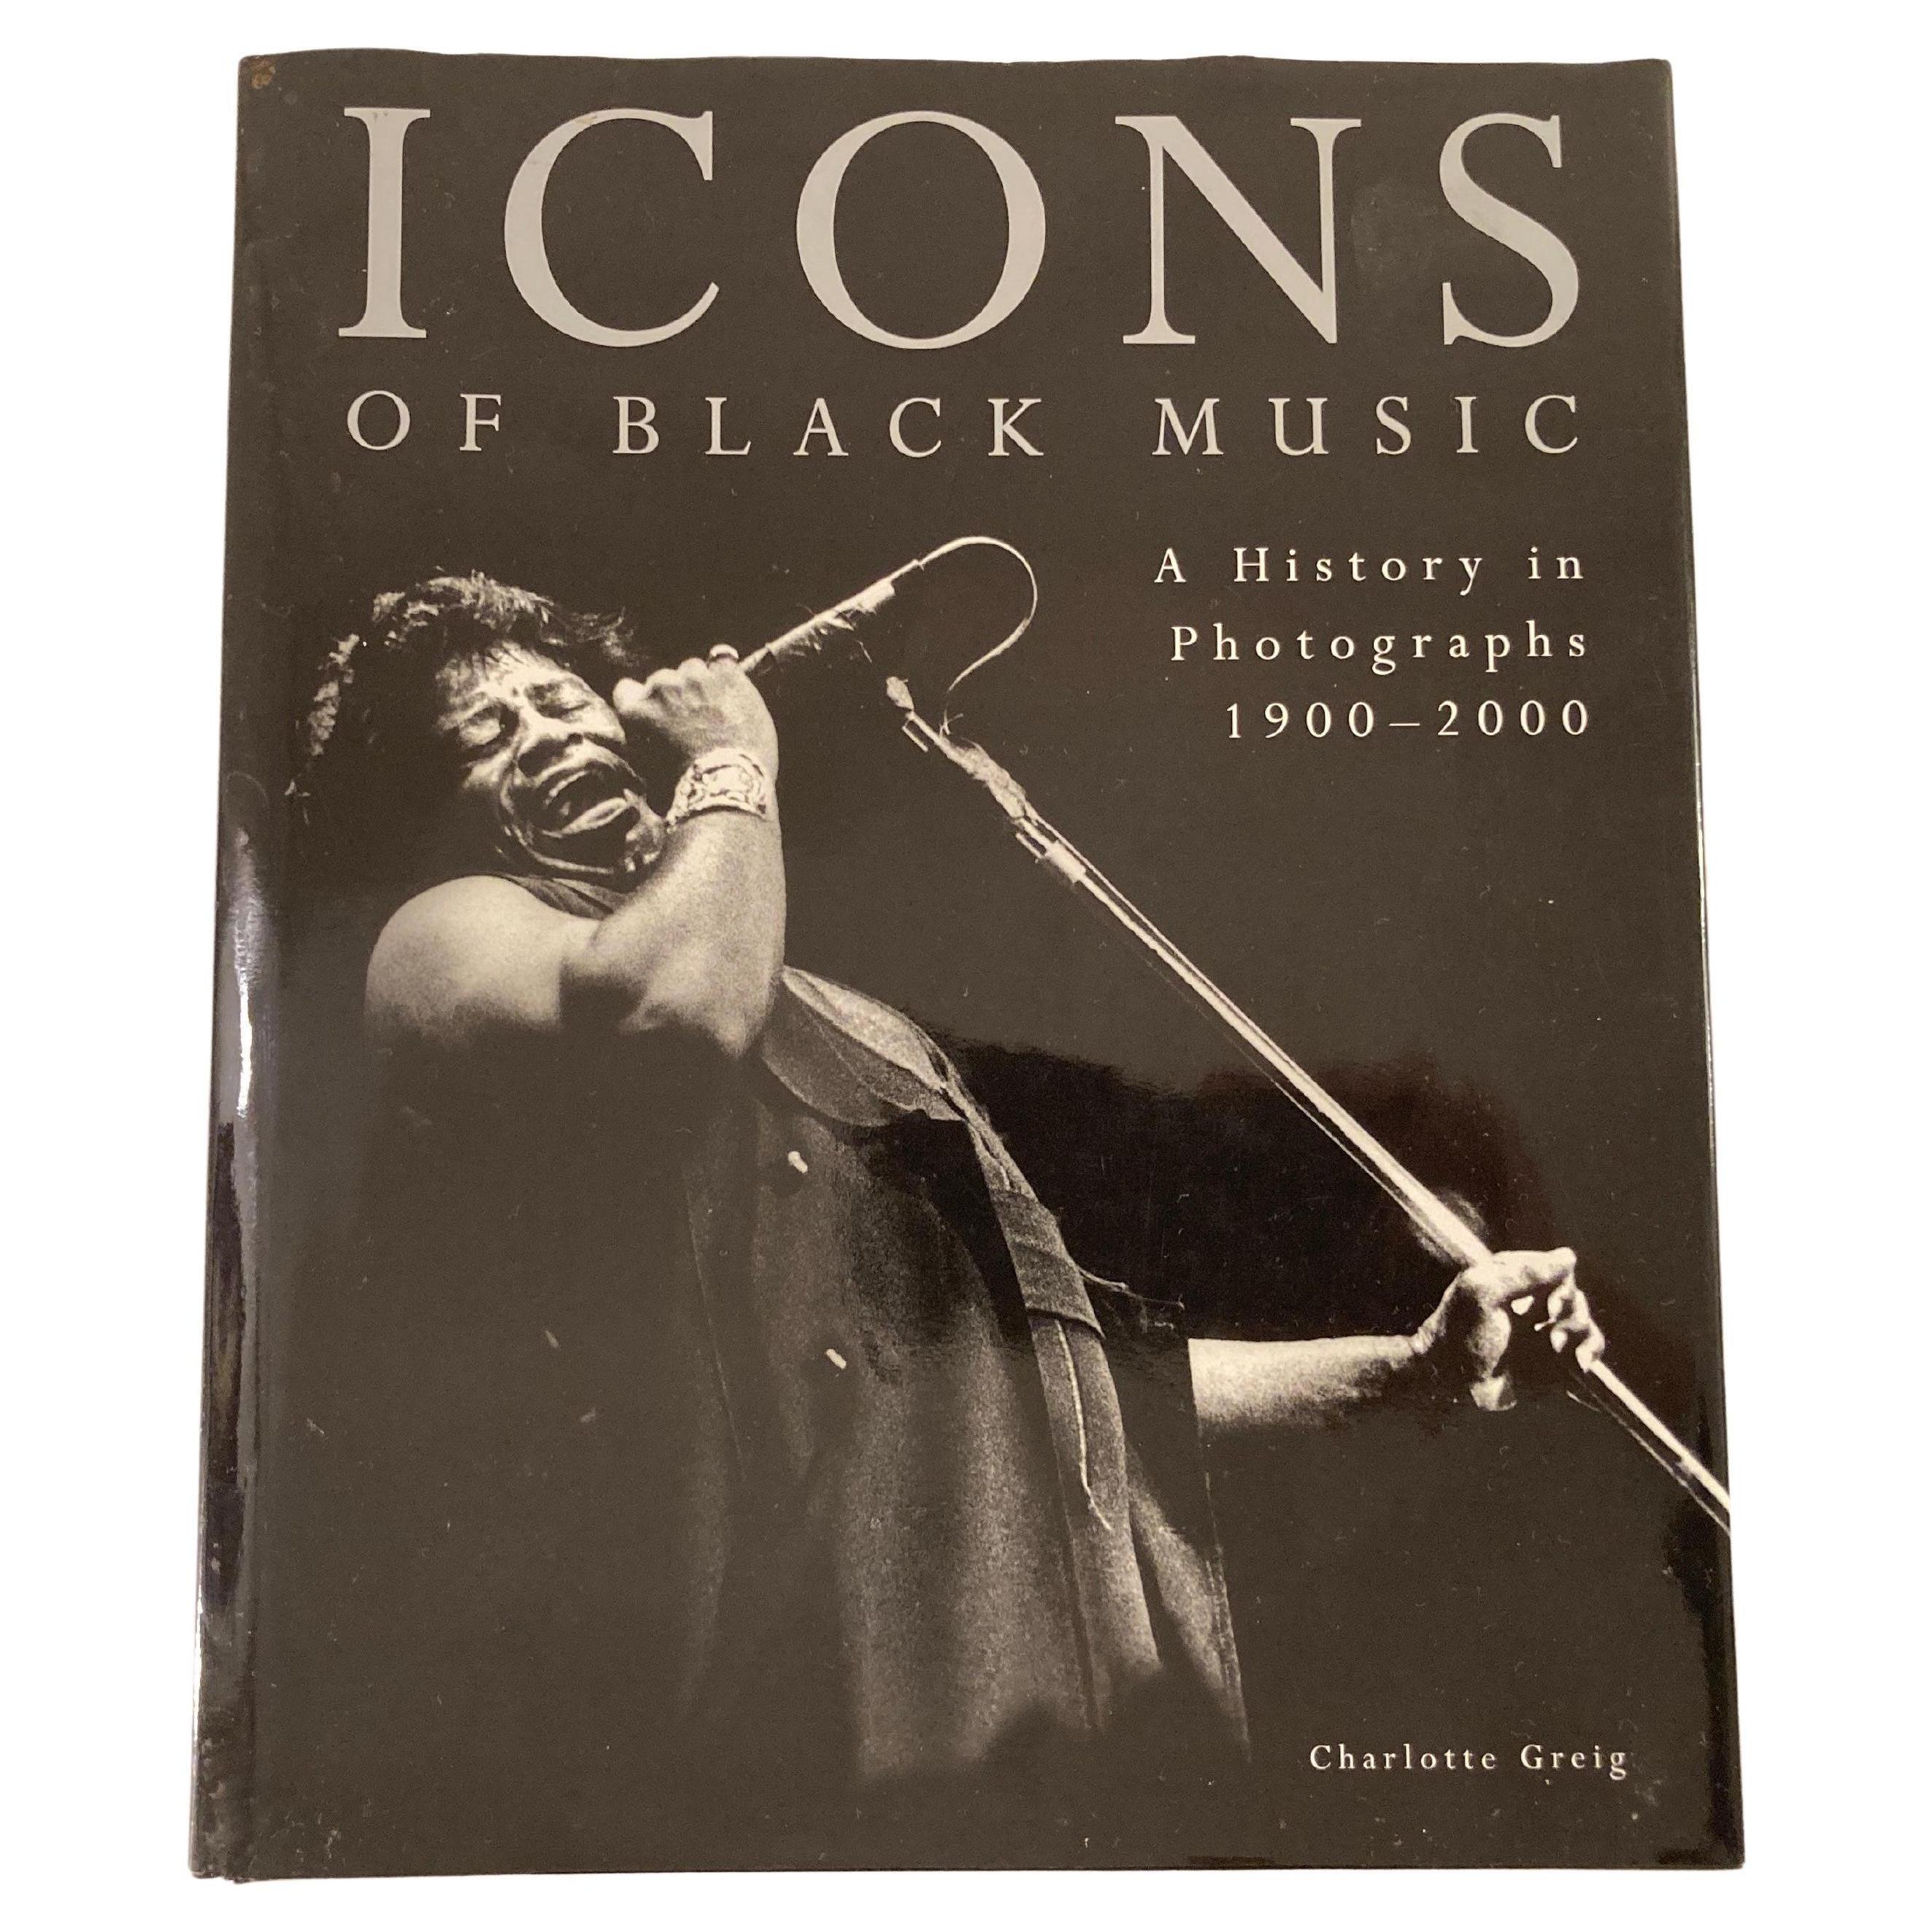 Icons Of Black Music A History In Photographs, 1900-2000 by Charlotte Greig